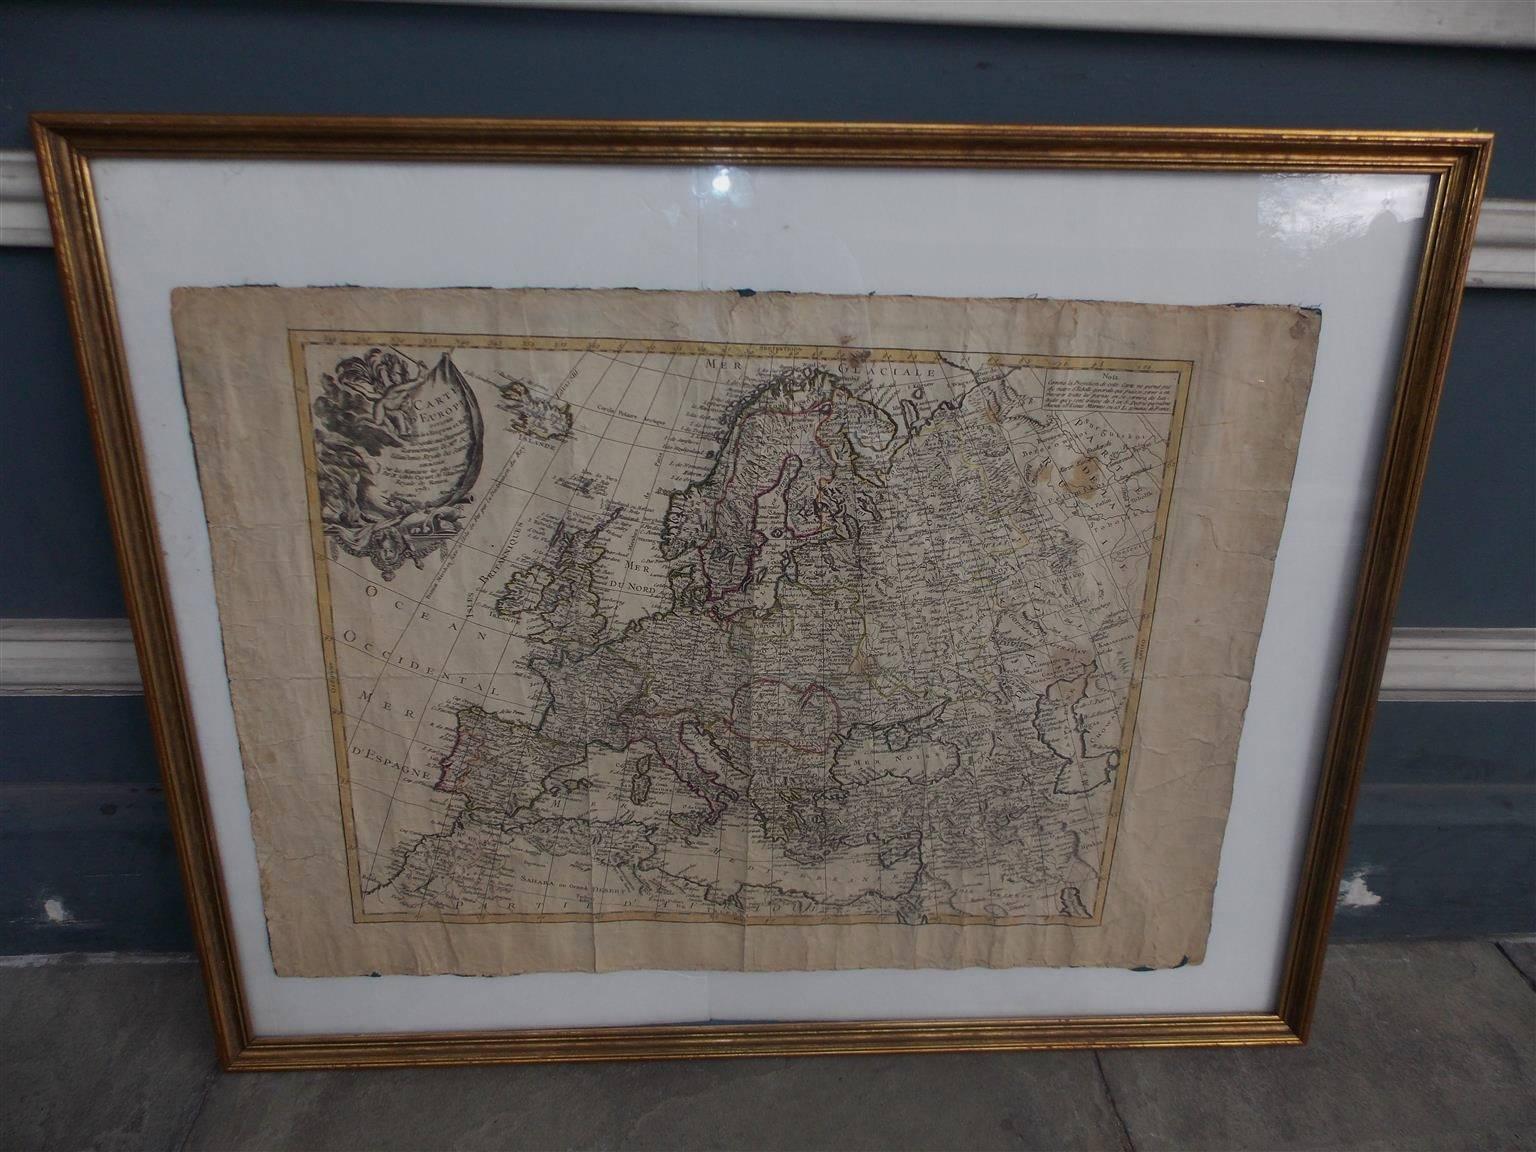 French European framed map printed on linen with a colorful outlines and border under glass. Late 18th Century. 
Measures: Map dimensions 22